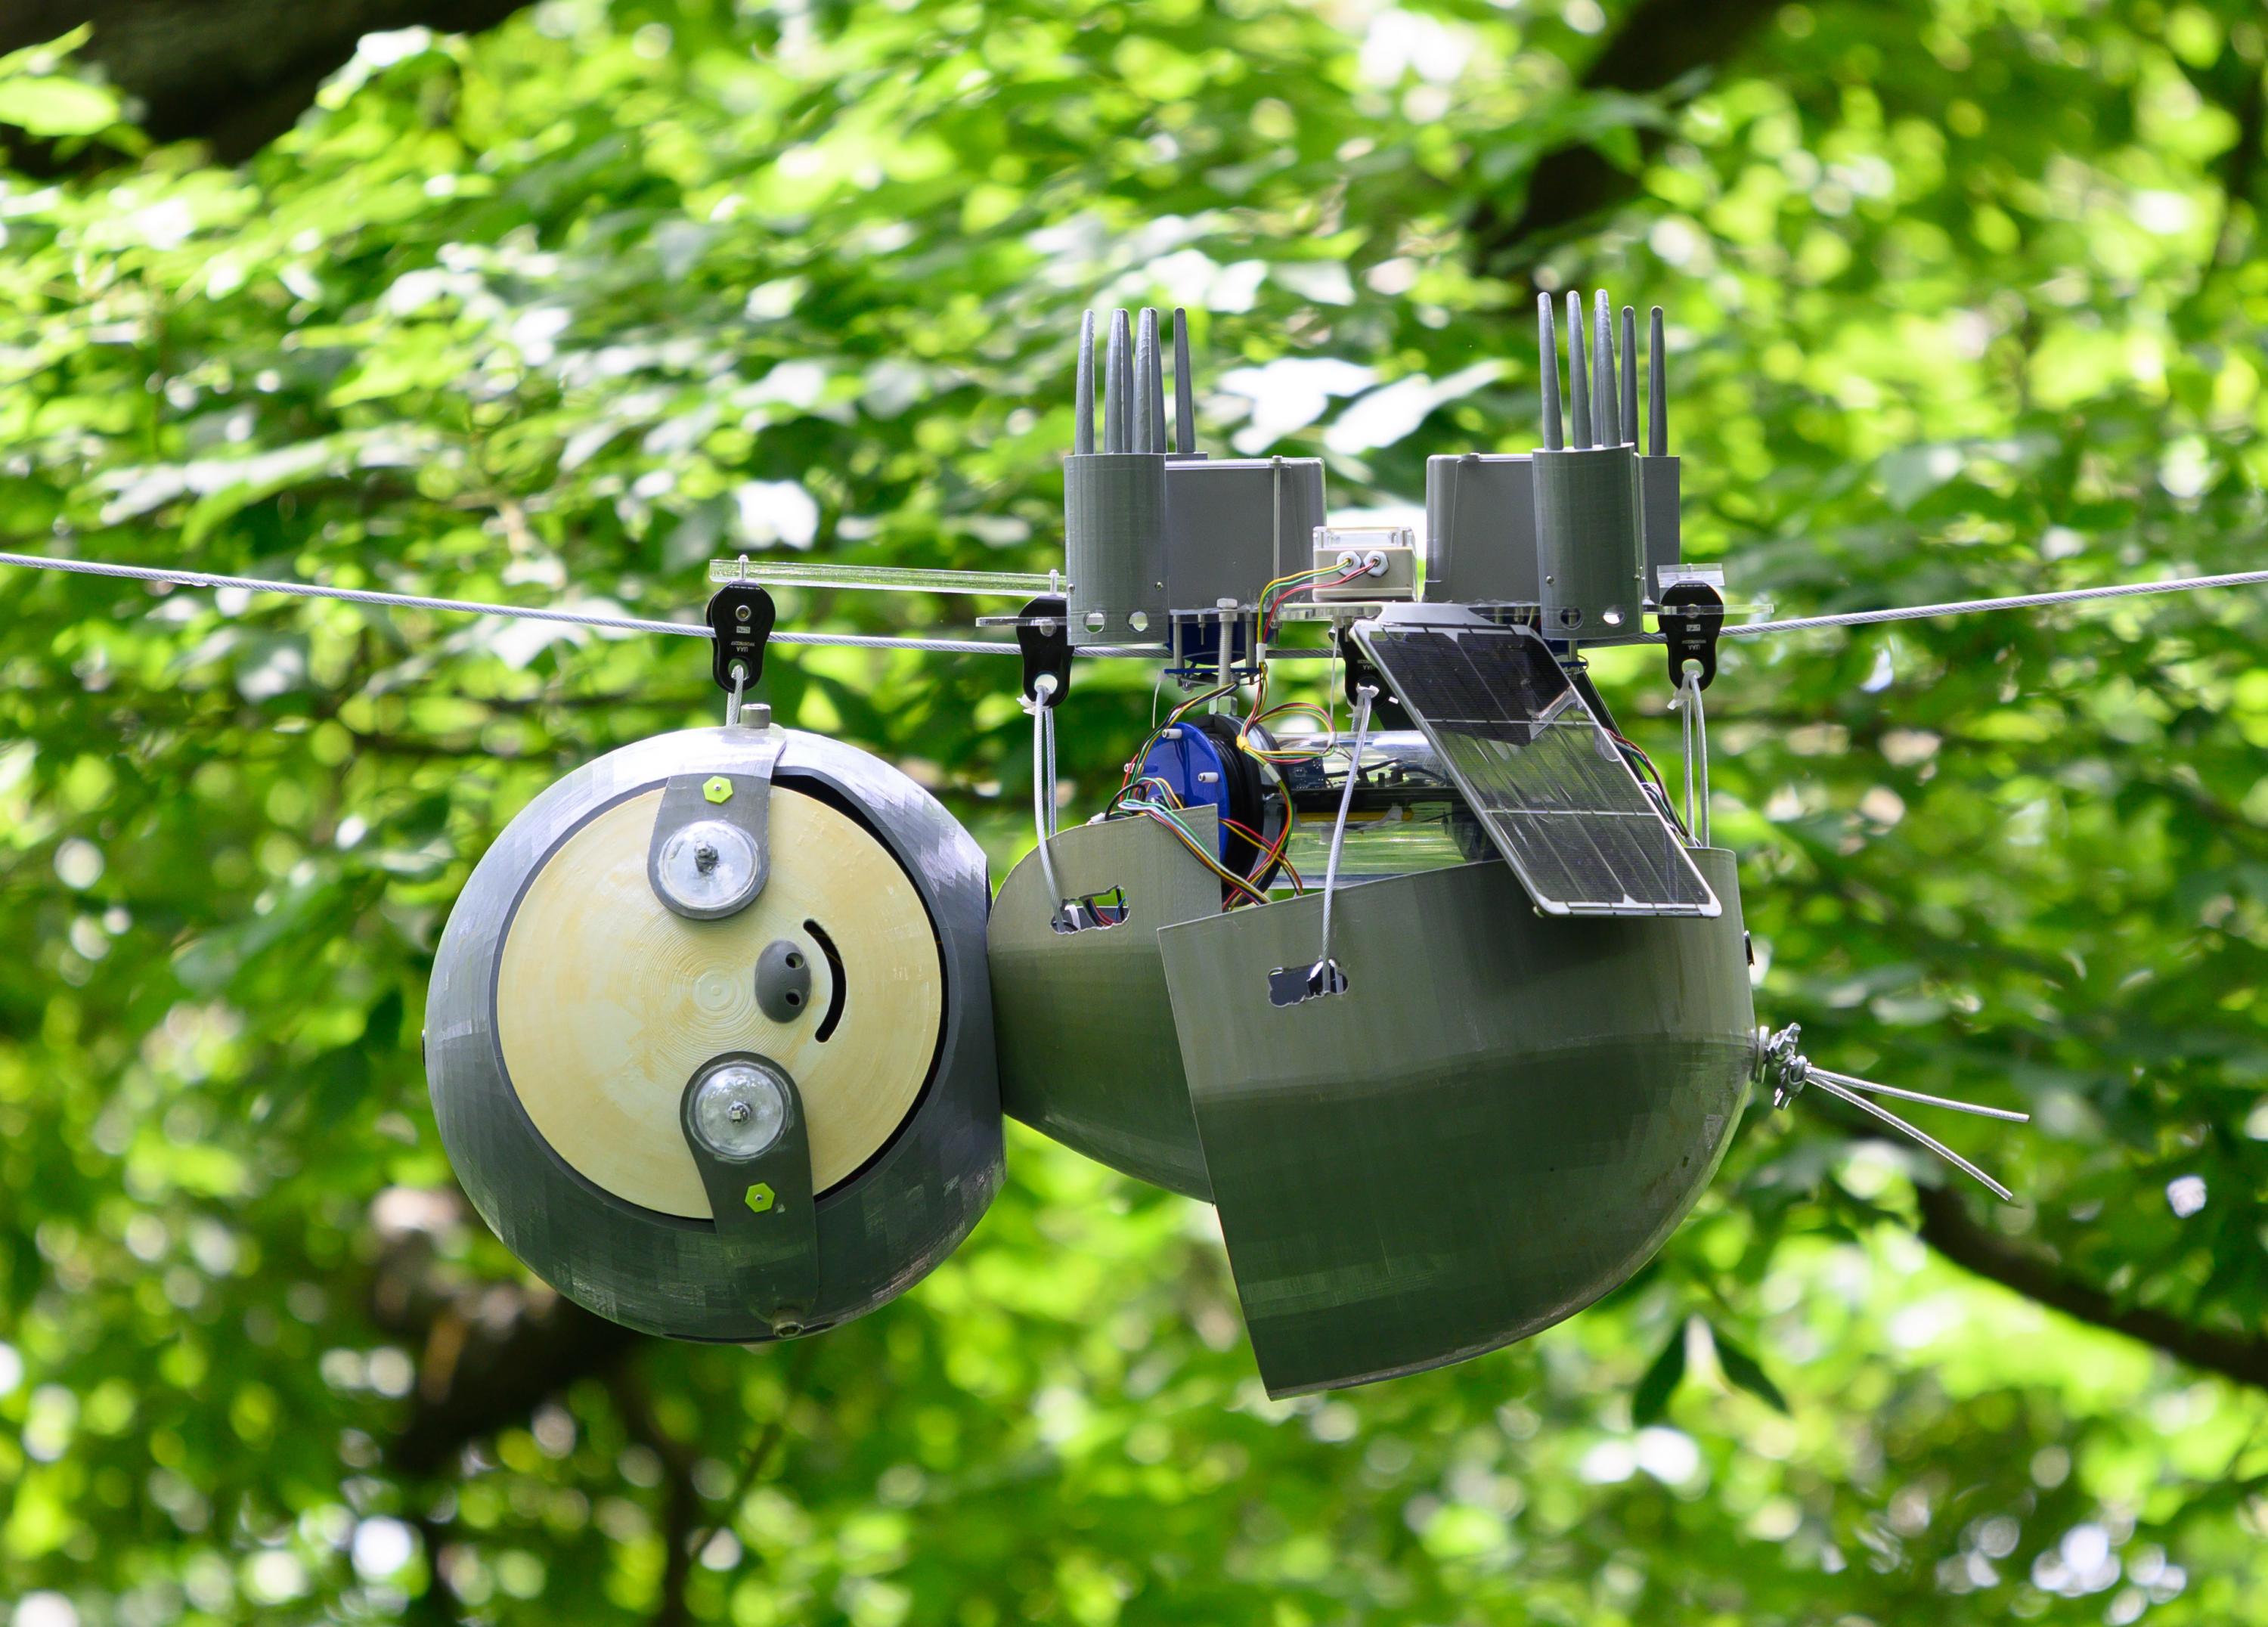 SlothBot is a slow-moving and energy-efficient robot that can linger in the trees to monitor animals, plants, and the environment below. It has been installed for testing in the Atlanta Botanical Garden. (Credit: Rob Felt, Georgia Tech)